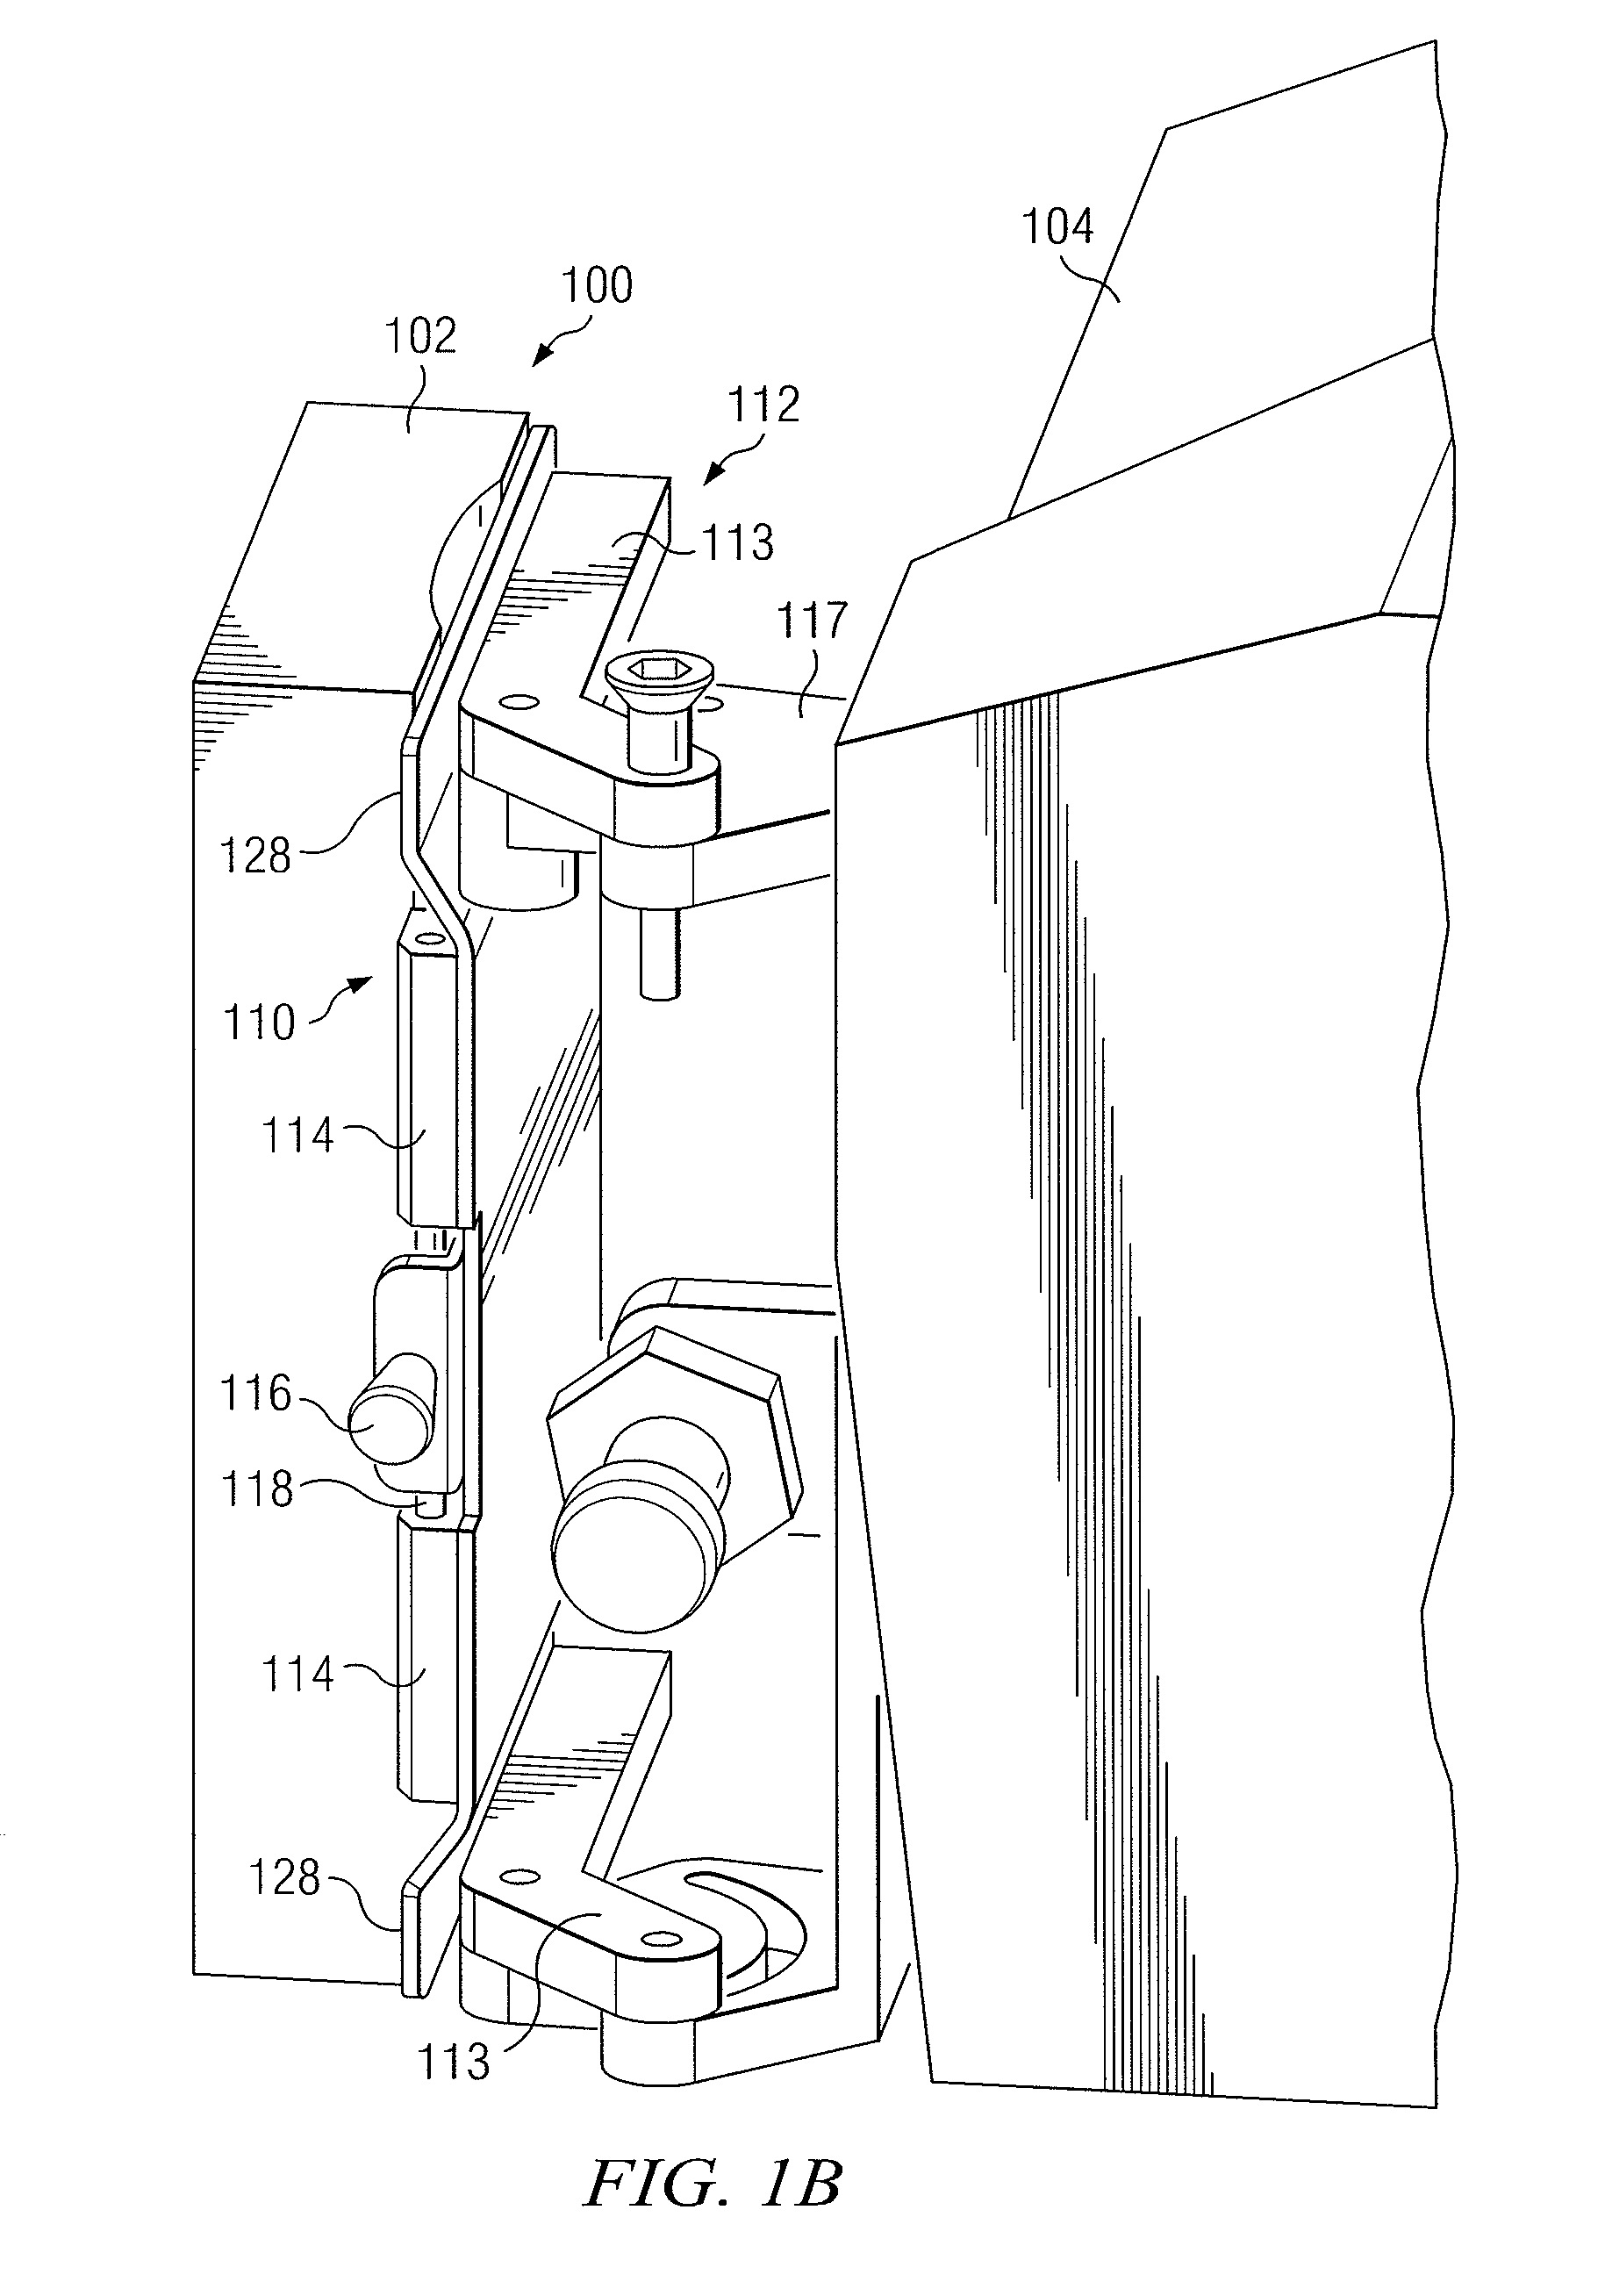 Universal mounting system for a handheld electronic device